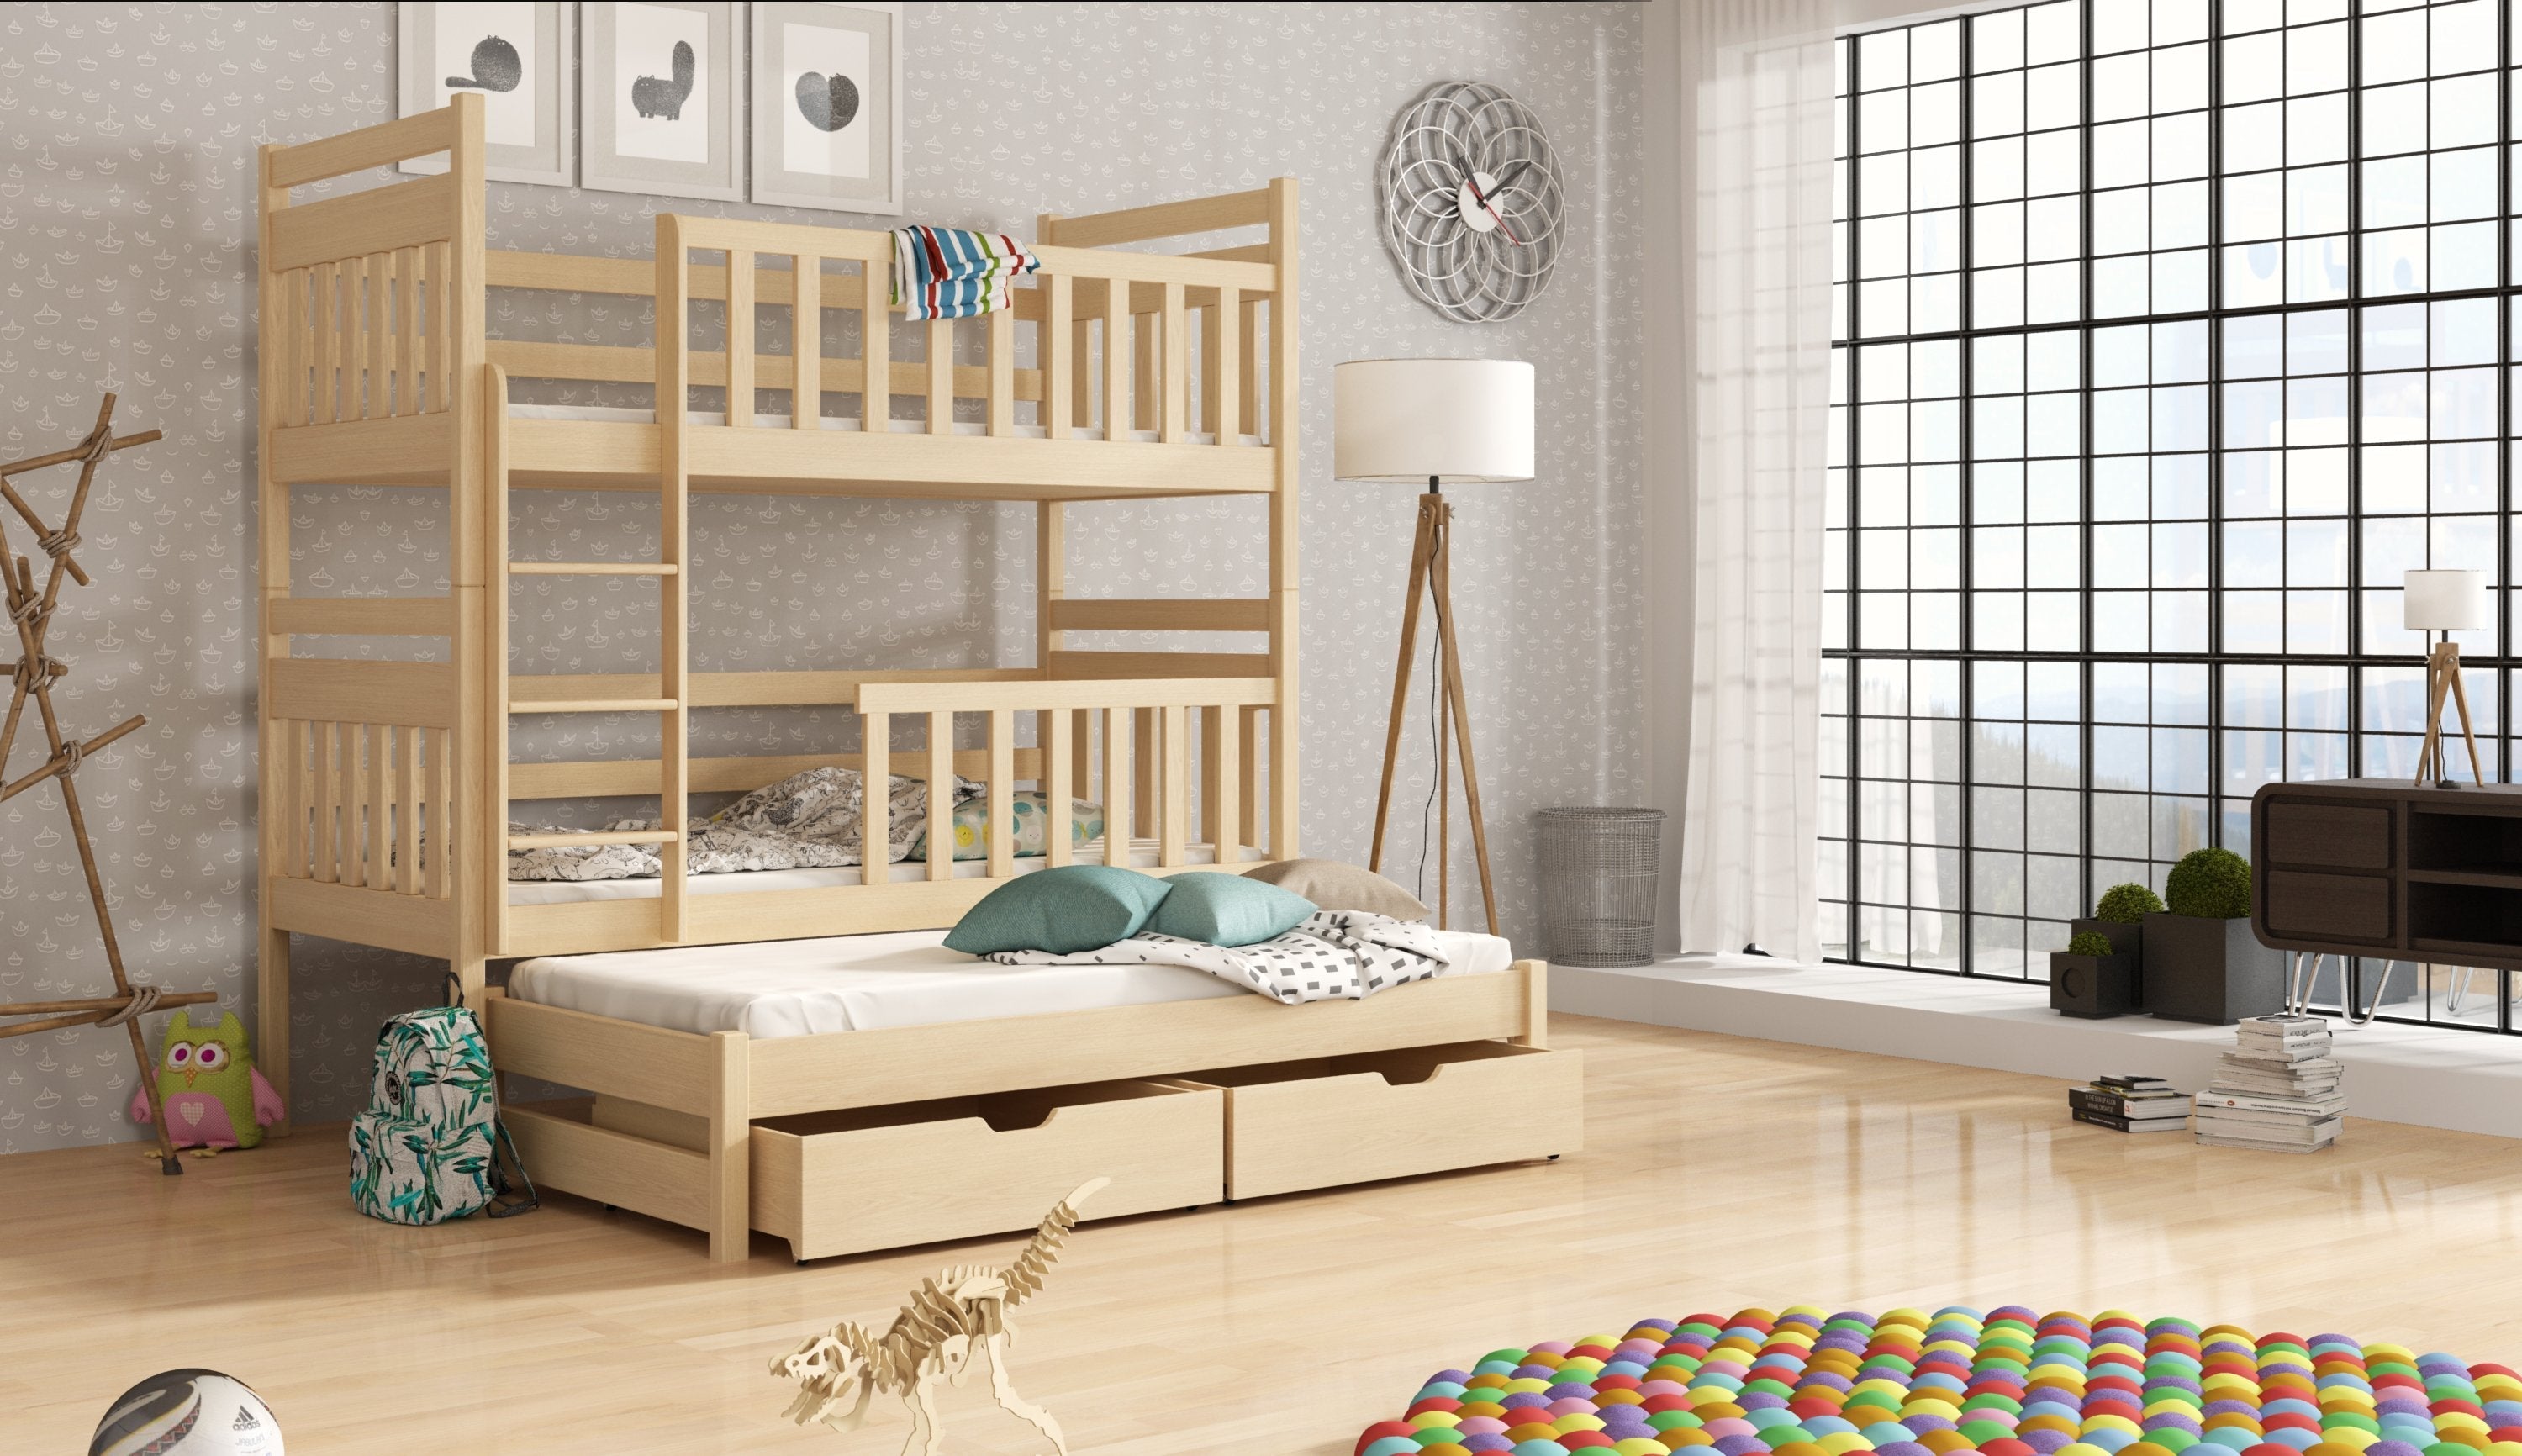 View Wooden Bunk Bed Klara with Trundle and Storage Pine FoamBonnell Mattresses information